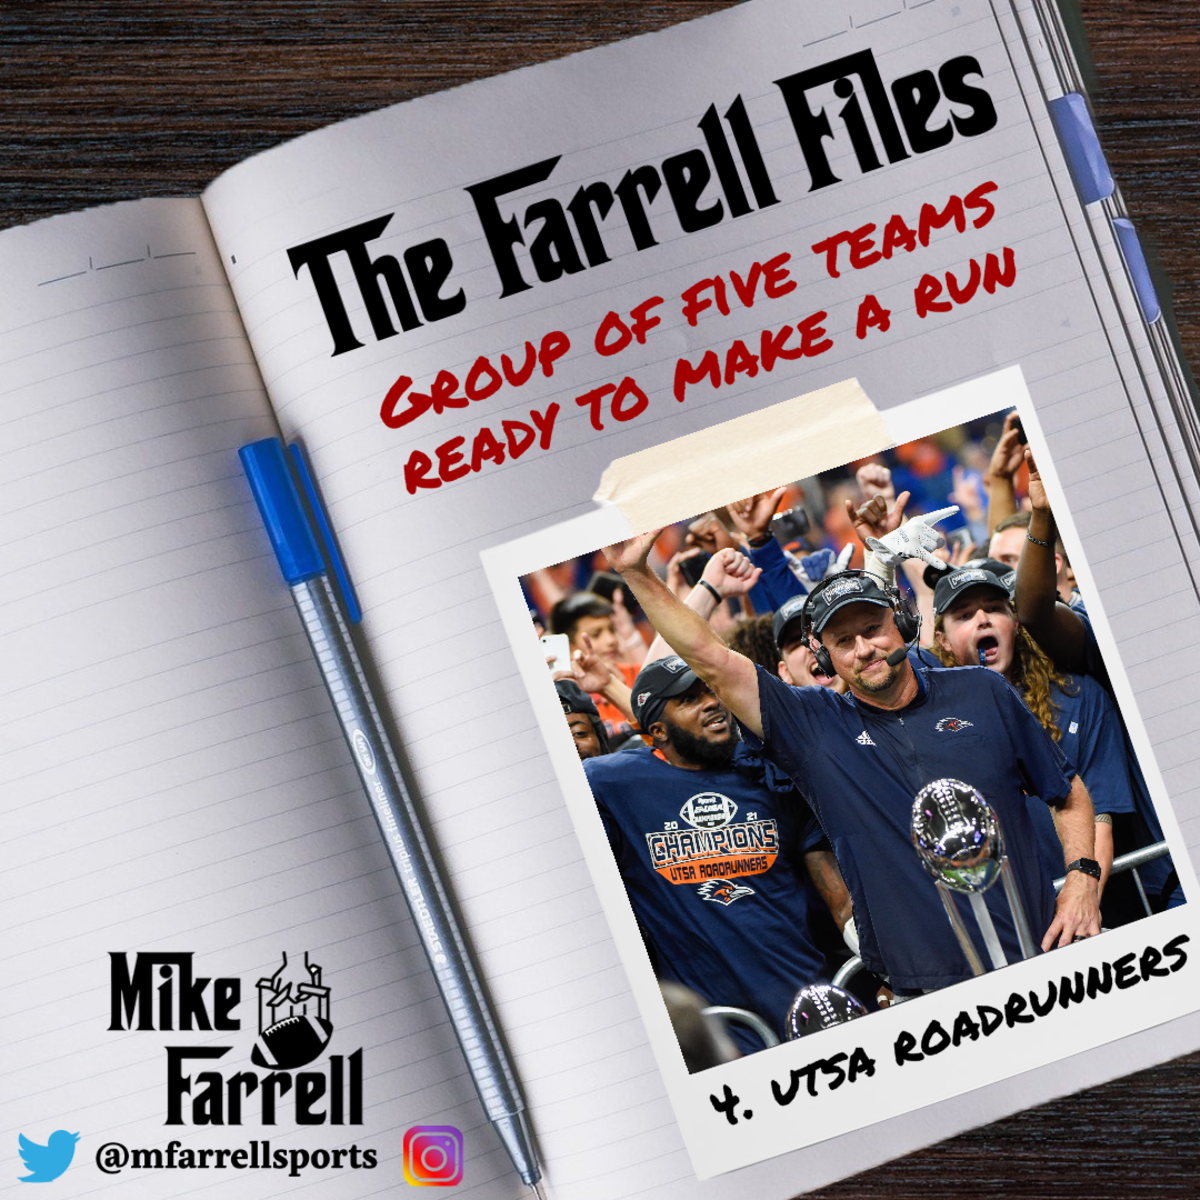 Farrell Files - Group of Five Teams